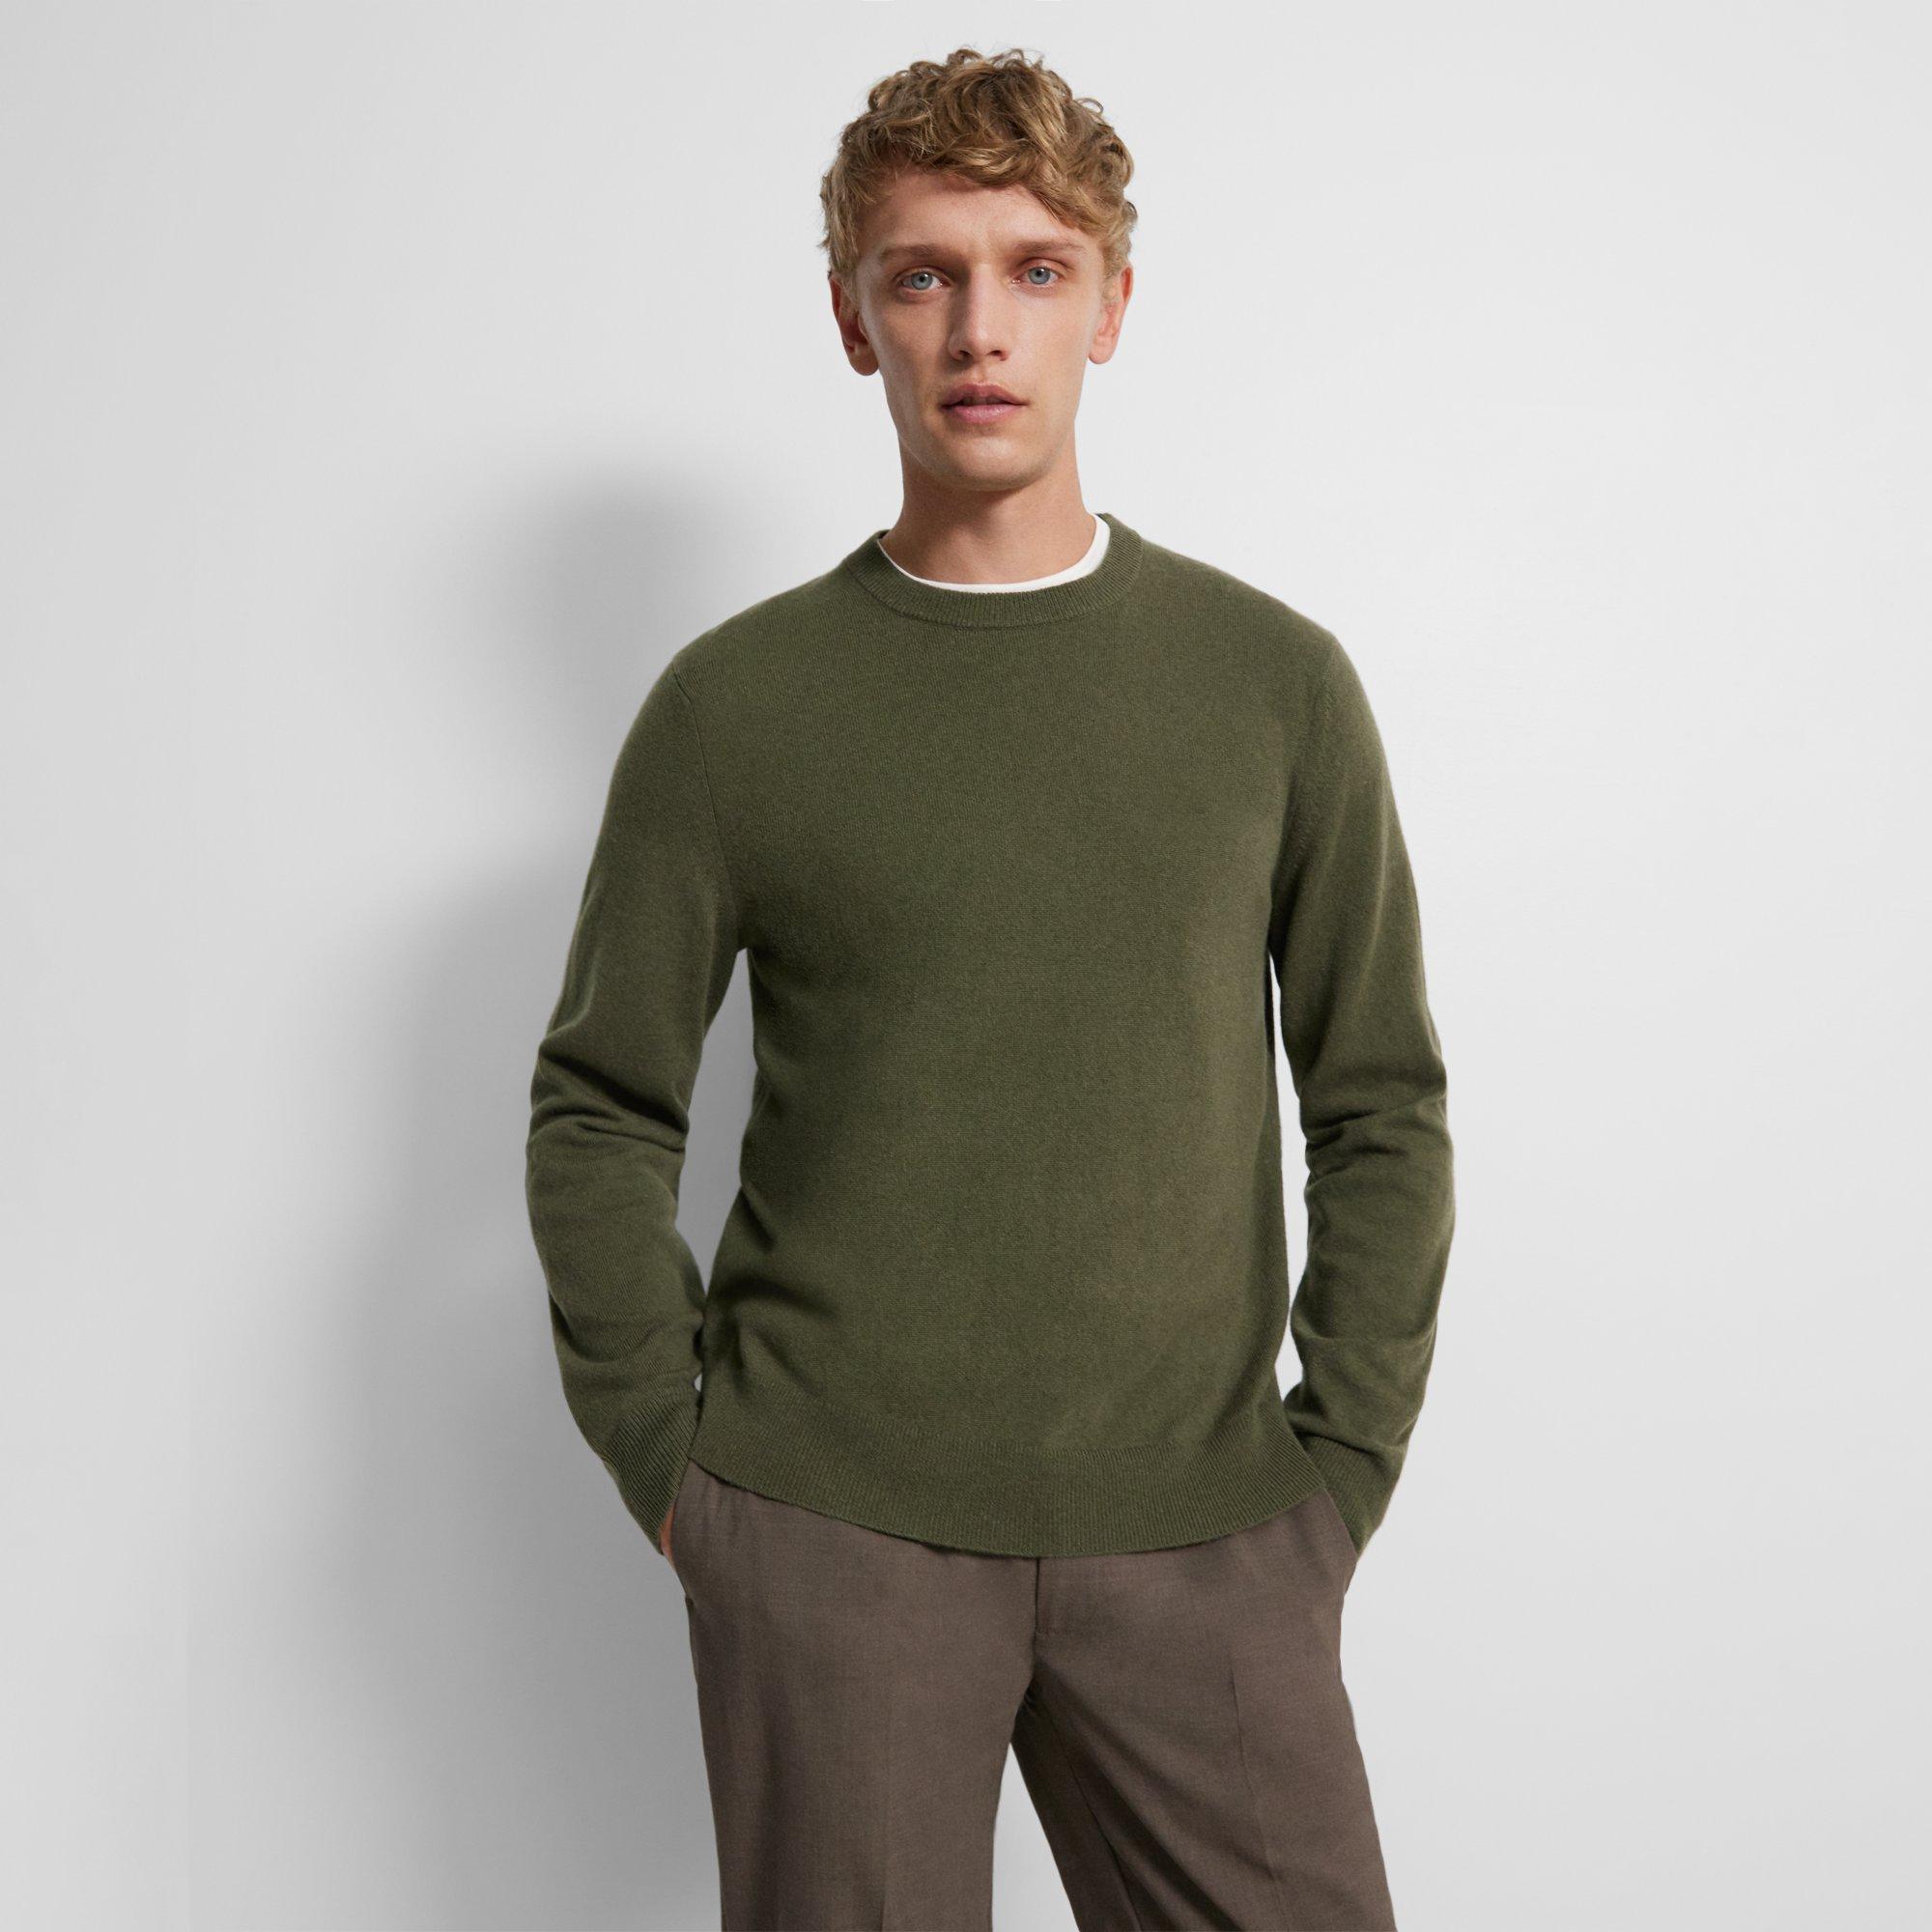 Men's Sweaters and Outerwear | Theory